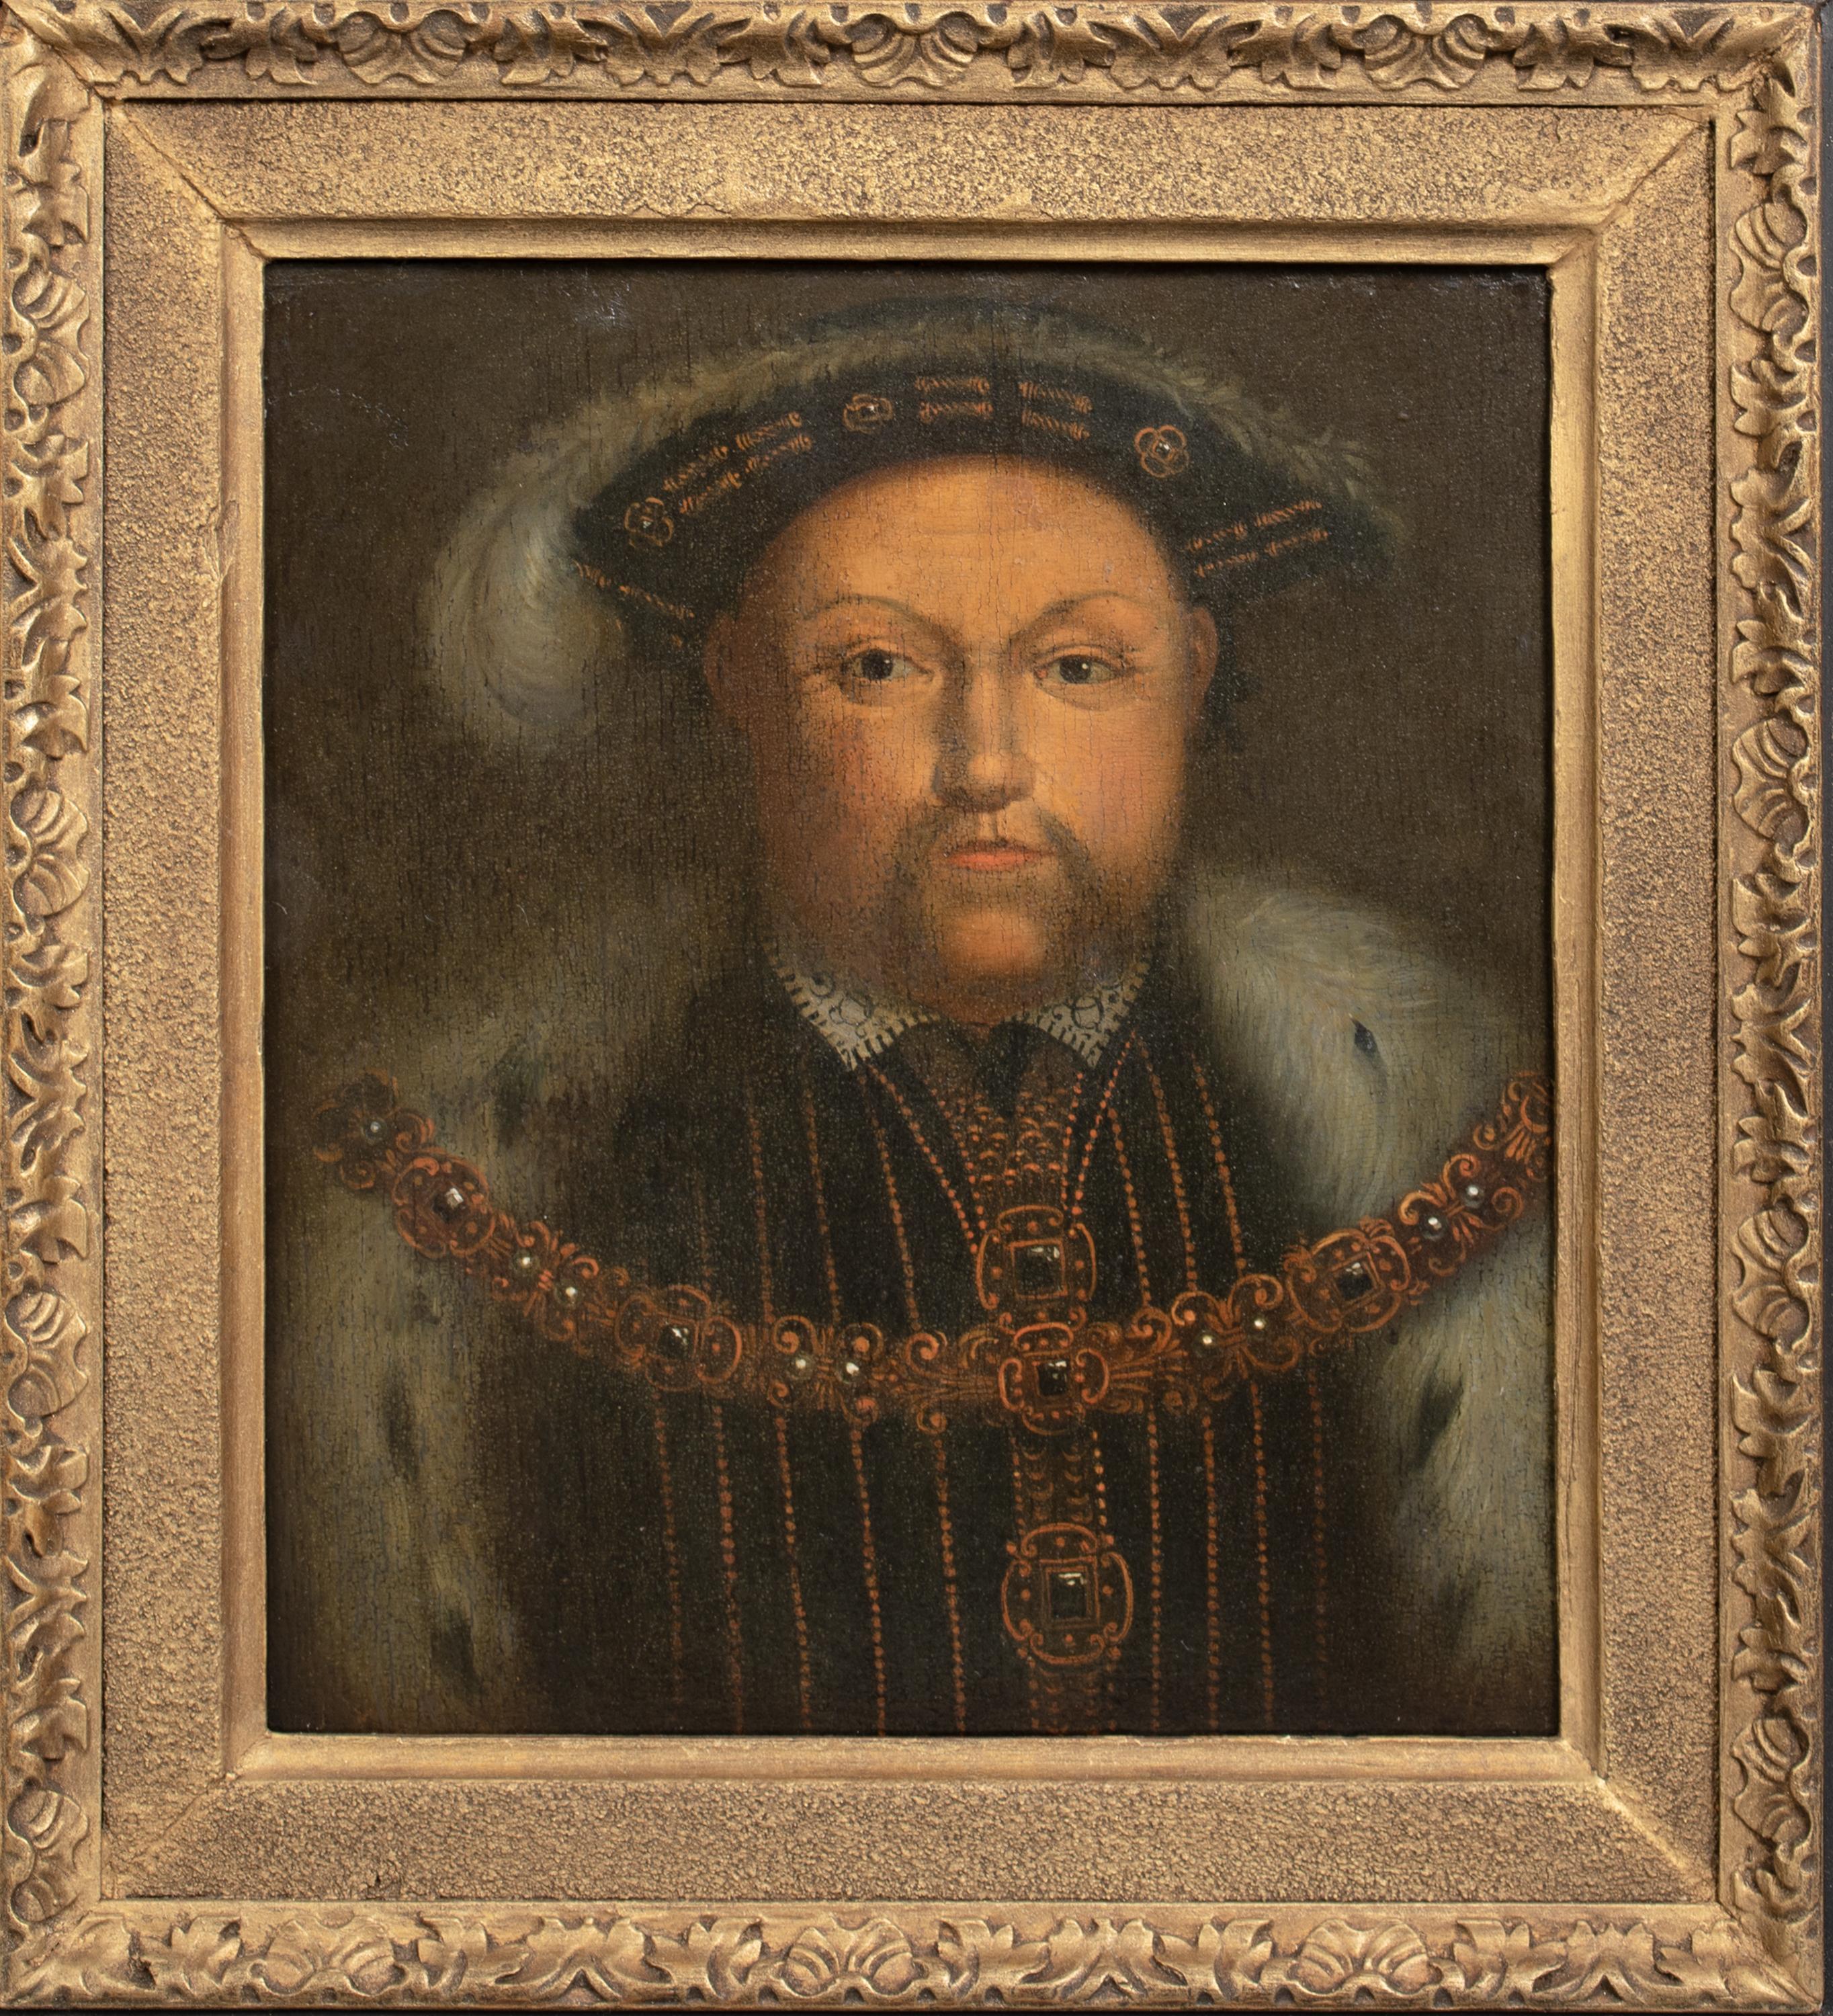 Portrait Of King Henry VIII (1491-1547) Of England, 16th Century

circle of HANS HOLBEIN (1497-1543)

16th Century English court portrait of King Henry VIII as King of England, oil on panel. Excellent quality and condition for its age depicting